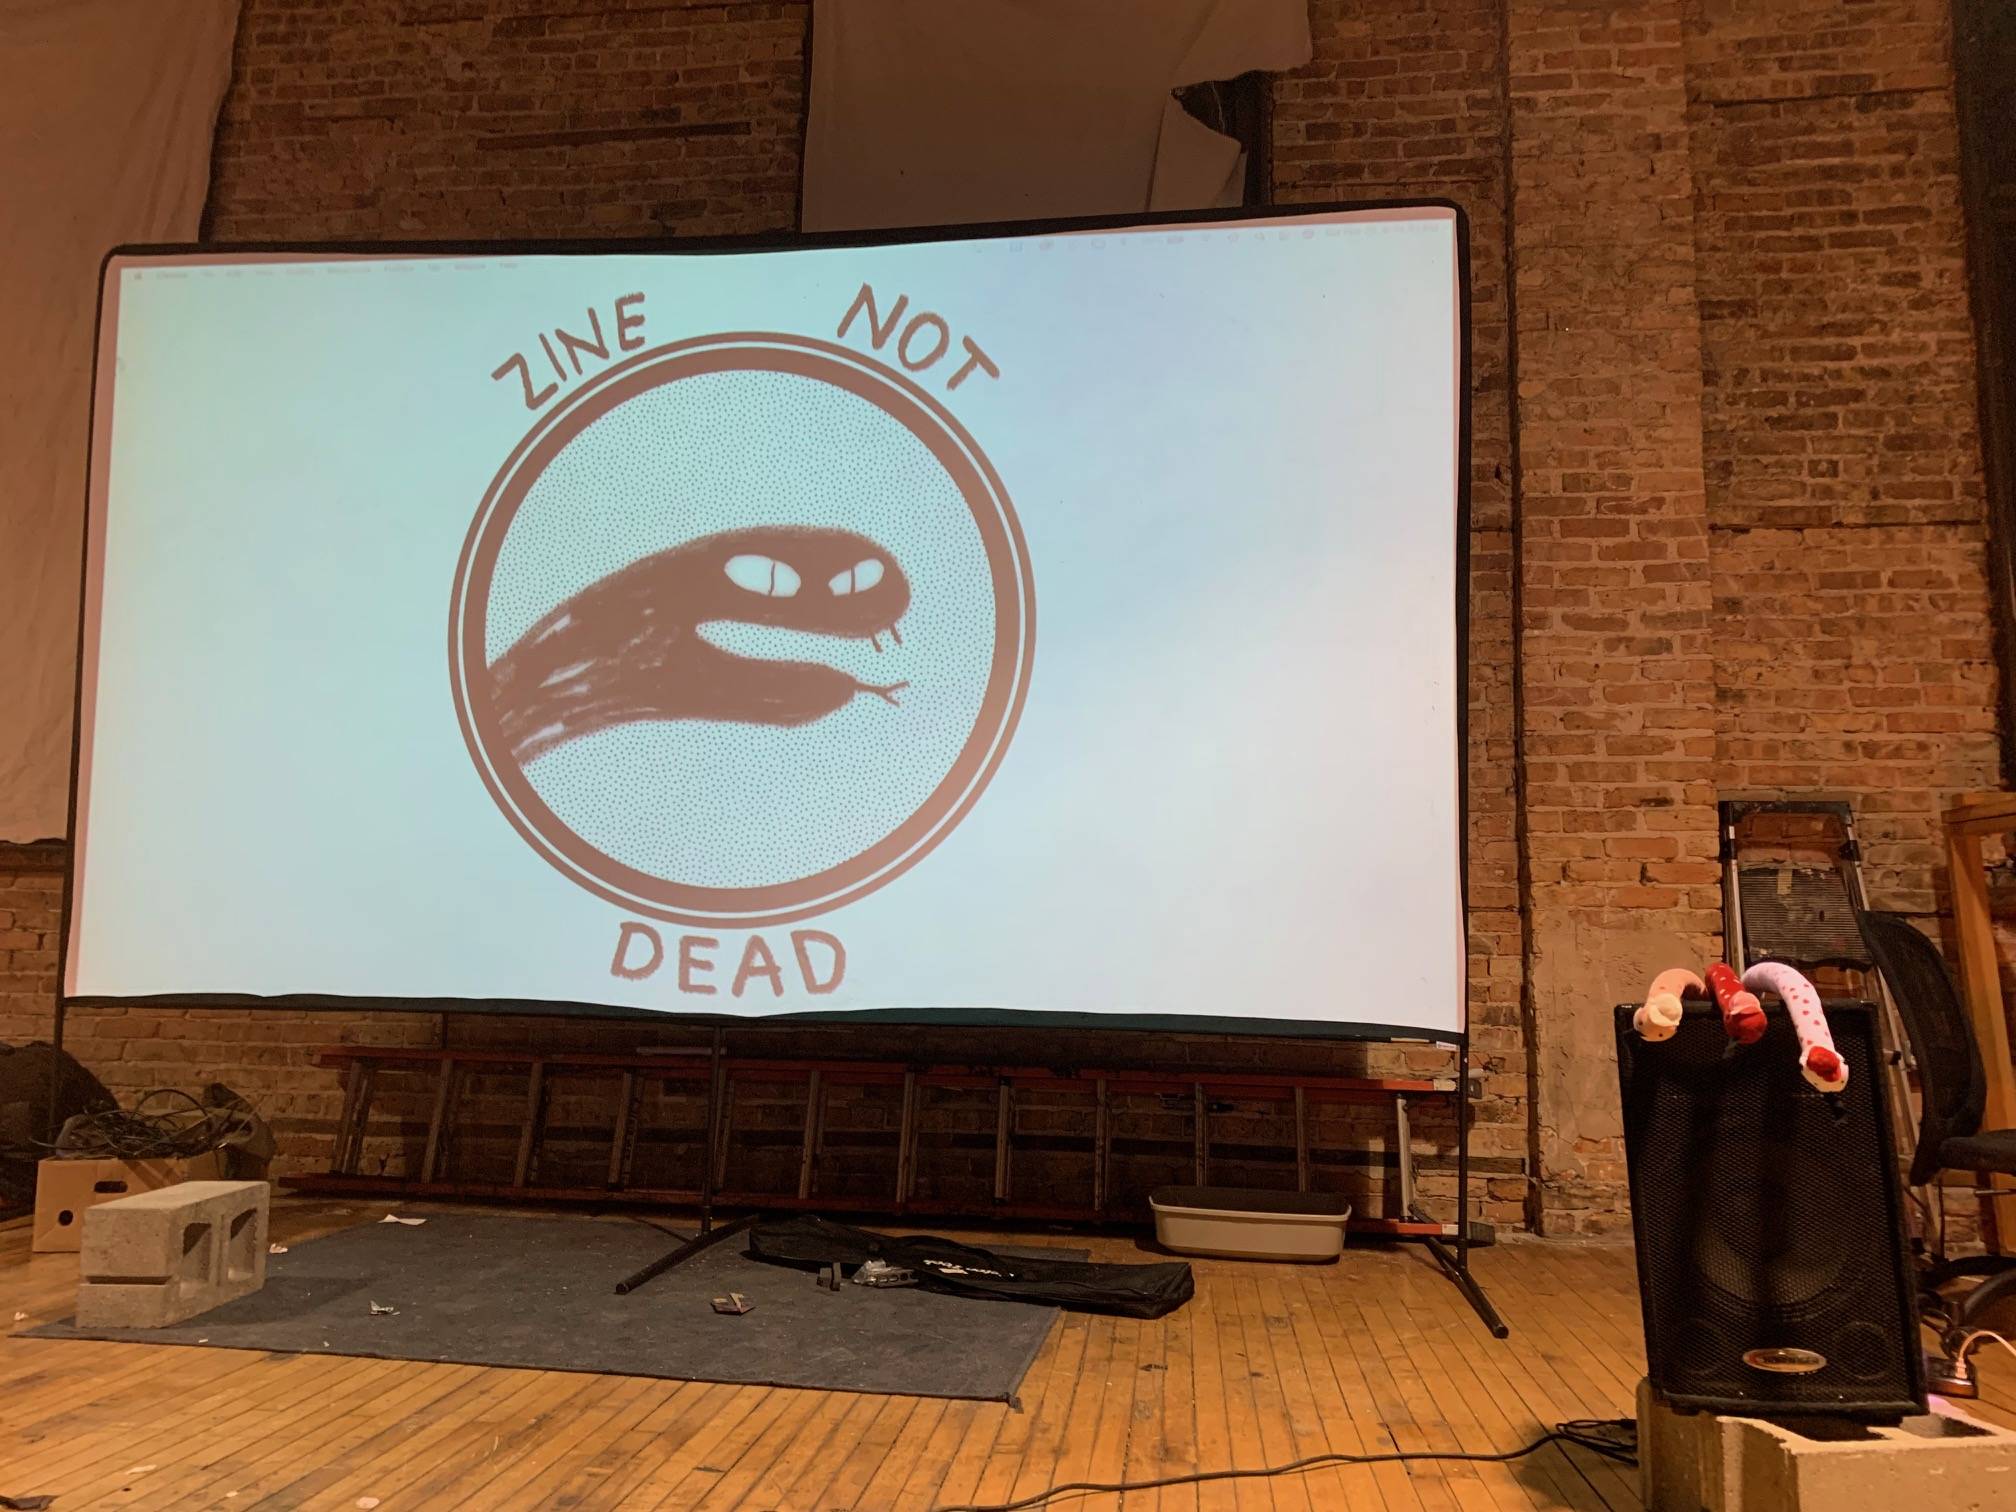 Zine Not Dead is a comic reading series that is hosted quarterly. The most recent Zine Not Dead was hosted on February 26th at the Archer Ballroom. There were performances from Audrey Gallacher (BFA 2023), Kelly Wang (BFA 2022), Gabriel Mason Howell (BFA 2018), Lenny Jooce, Caroline Cash (BFA 2019), Alex and Hannah Larson Hall, and Tommy Parrish.